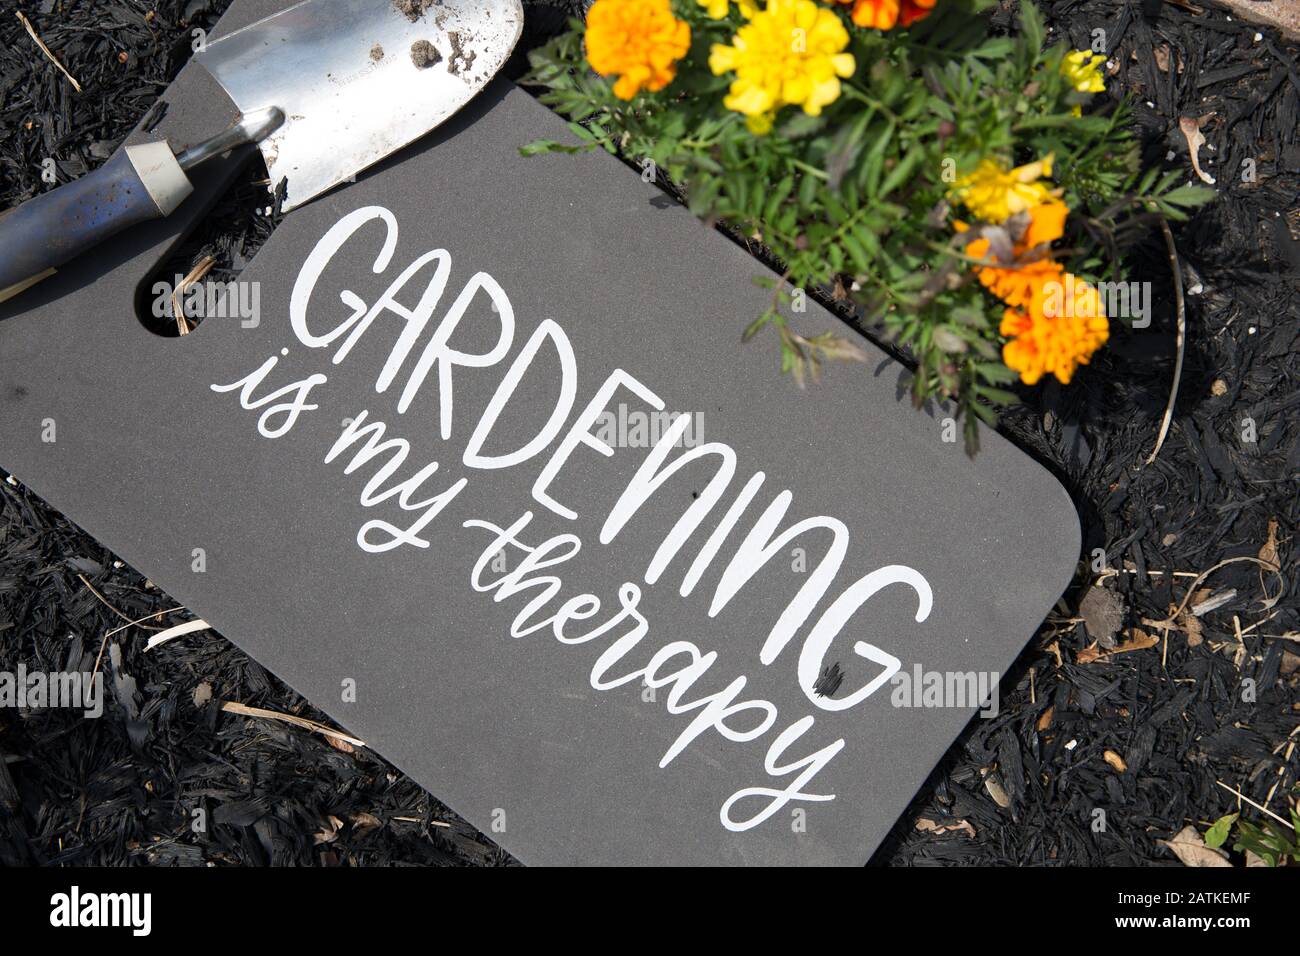 Gardening is my Therapy Stock Photo